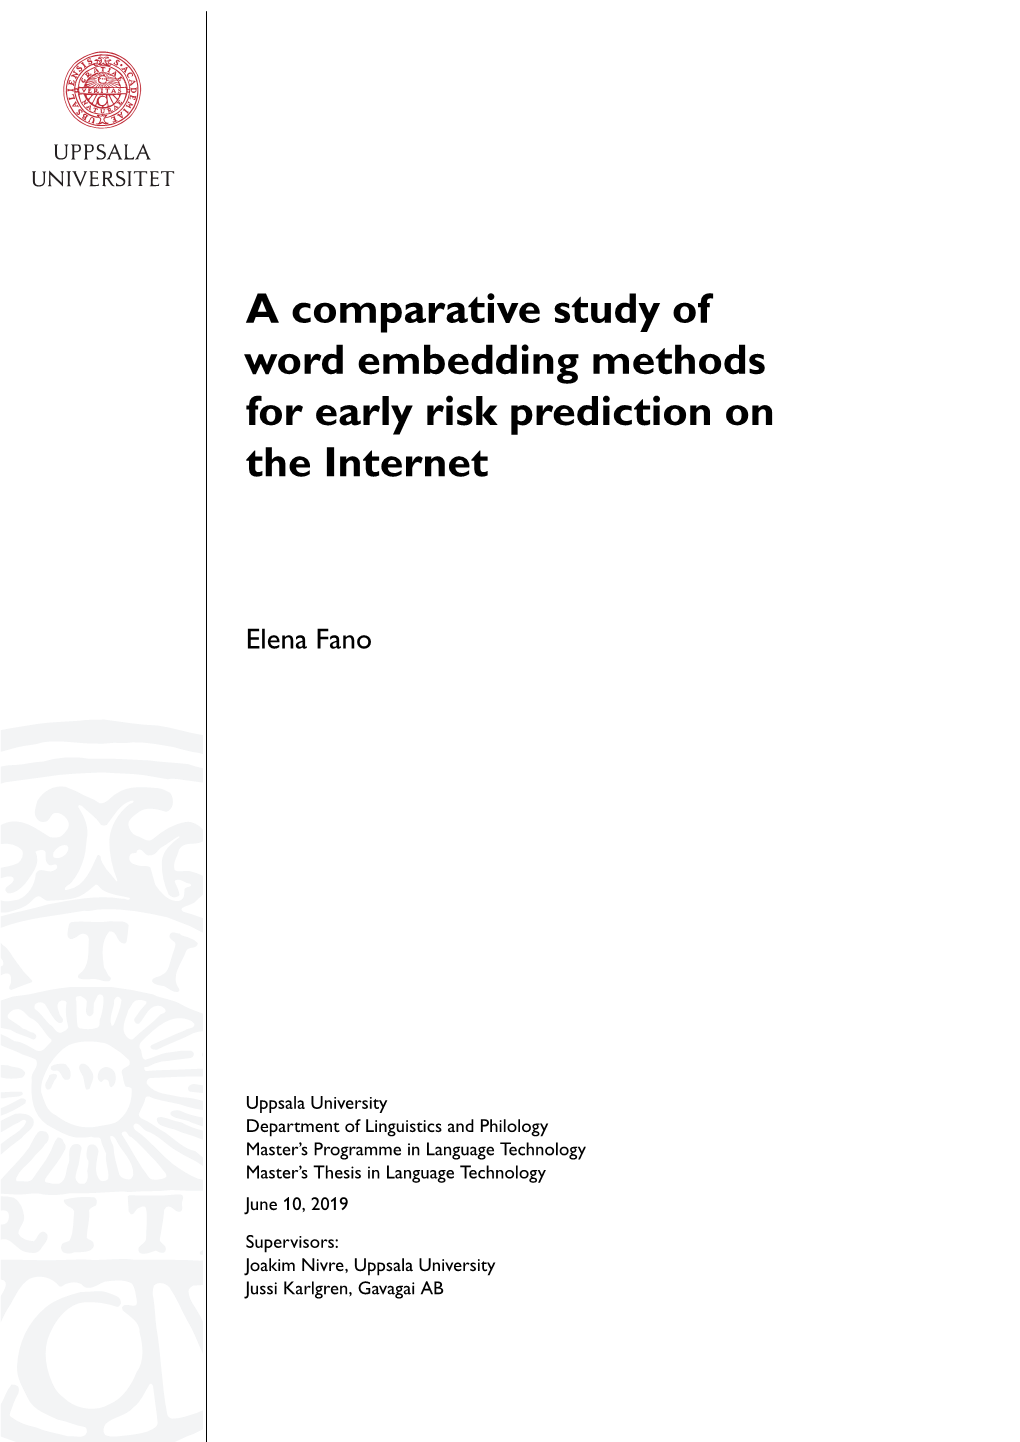 A Comparative Study of Word Embedding Methods for Early Risk Prediction on the Internet